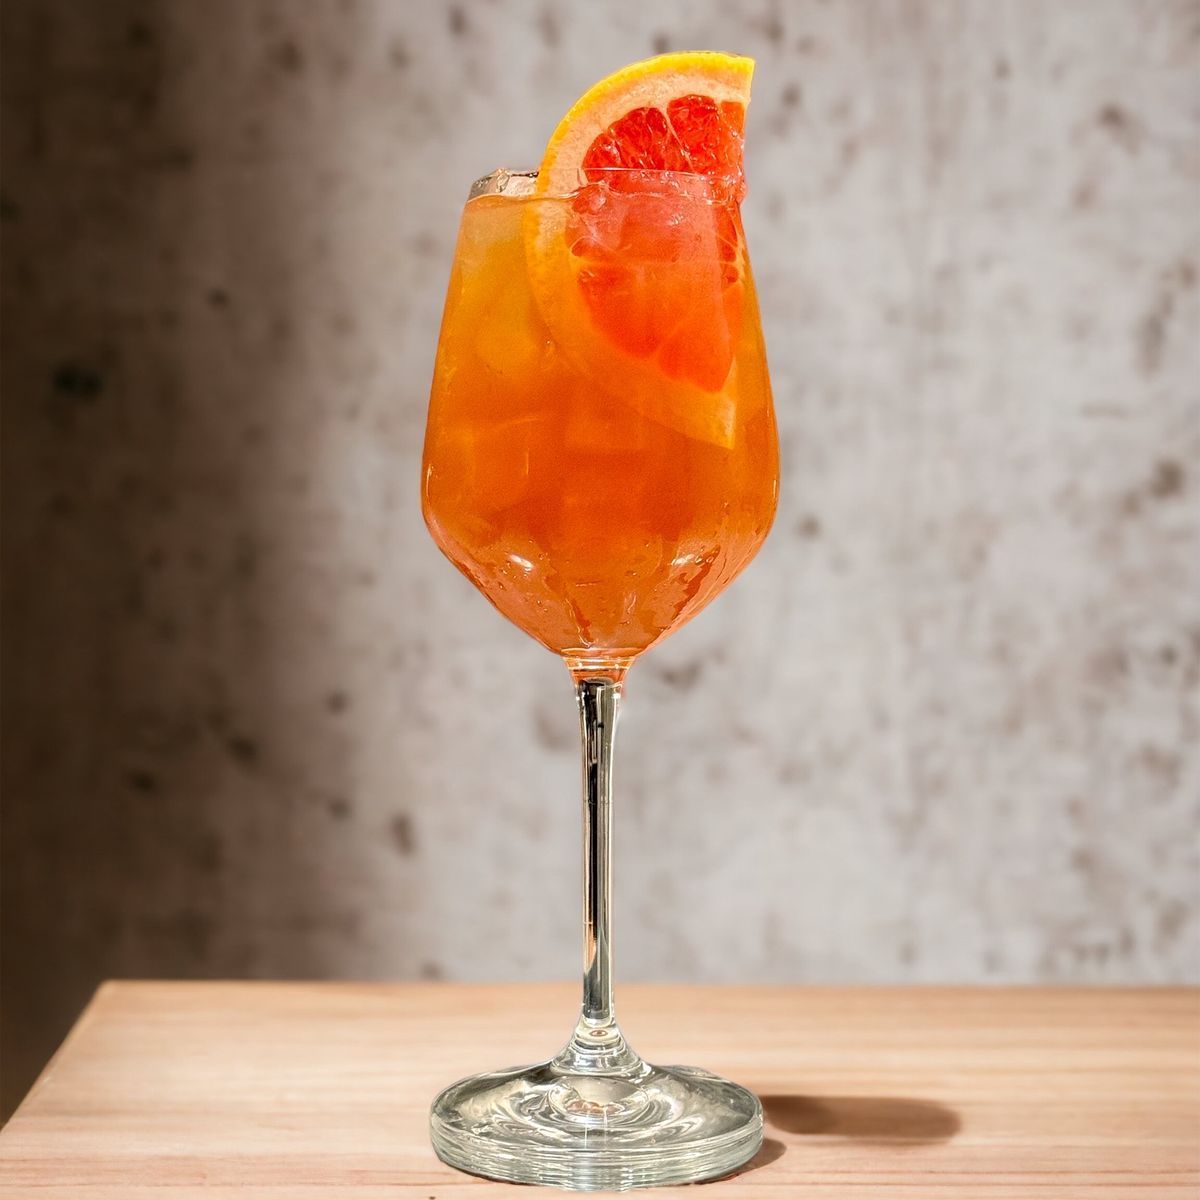 Here’s an easy 3-ingredients spritz to replace your bottomless mimosas and Bellinis (only if you want to… I do love me some bottomless mimosas…).  Garnish it with a slice of citrus. I’d go with a slice of blood orange but all I had was grapefruit…so there’s that. 